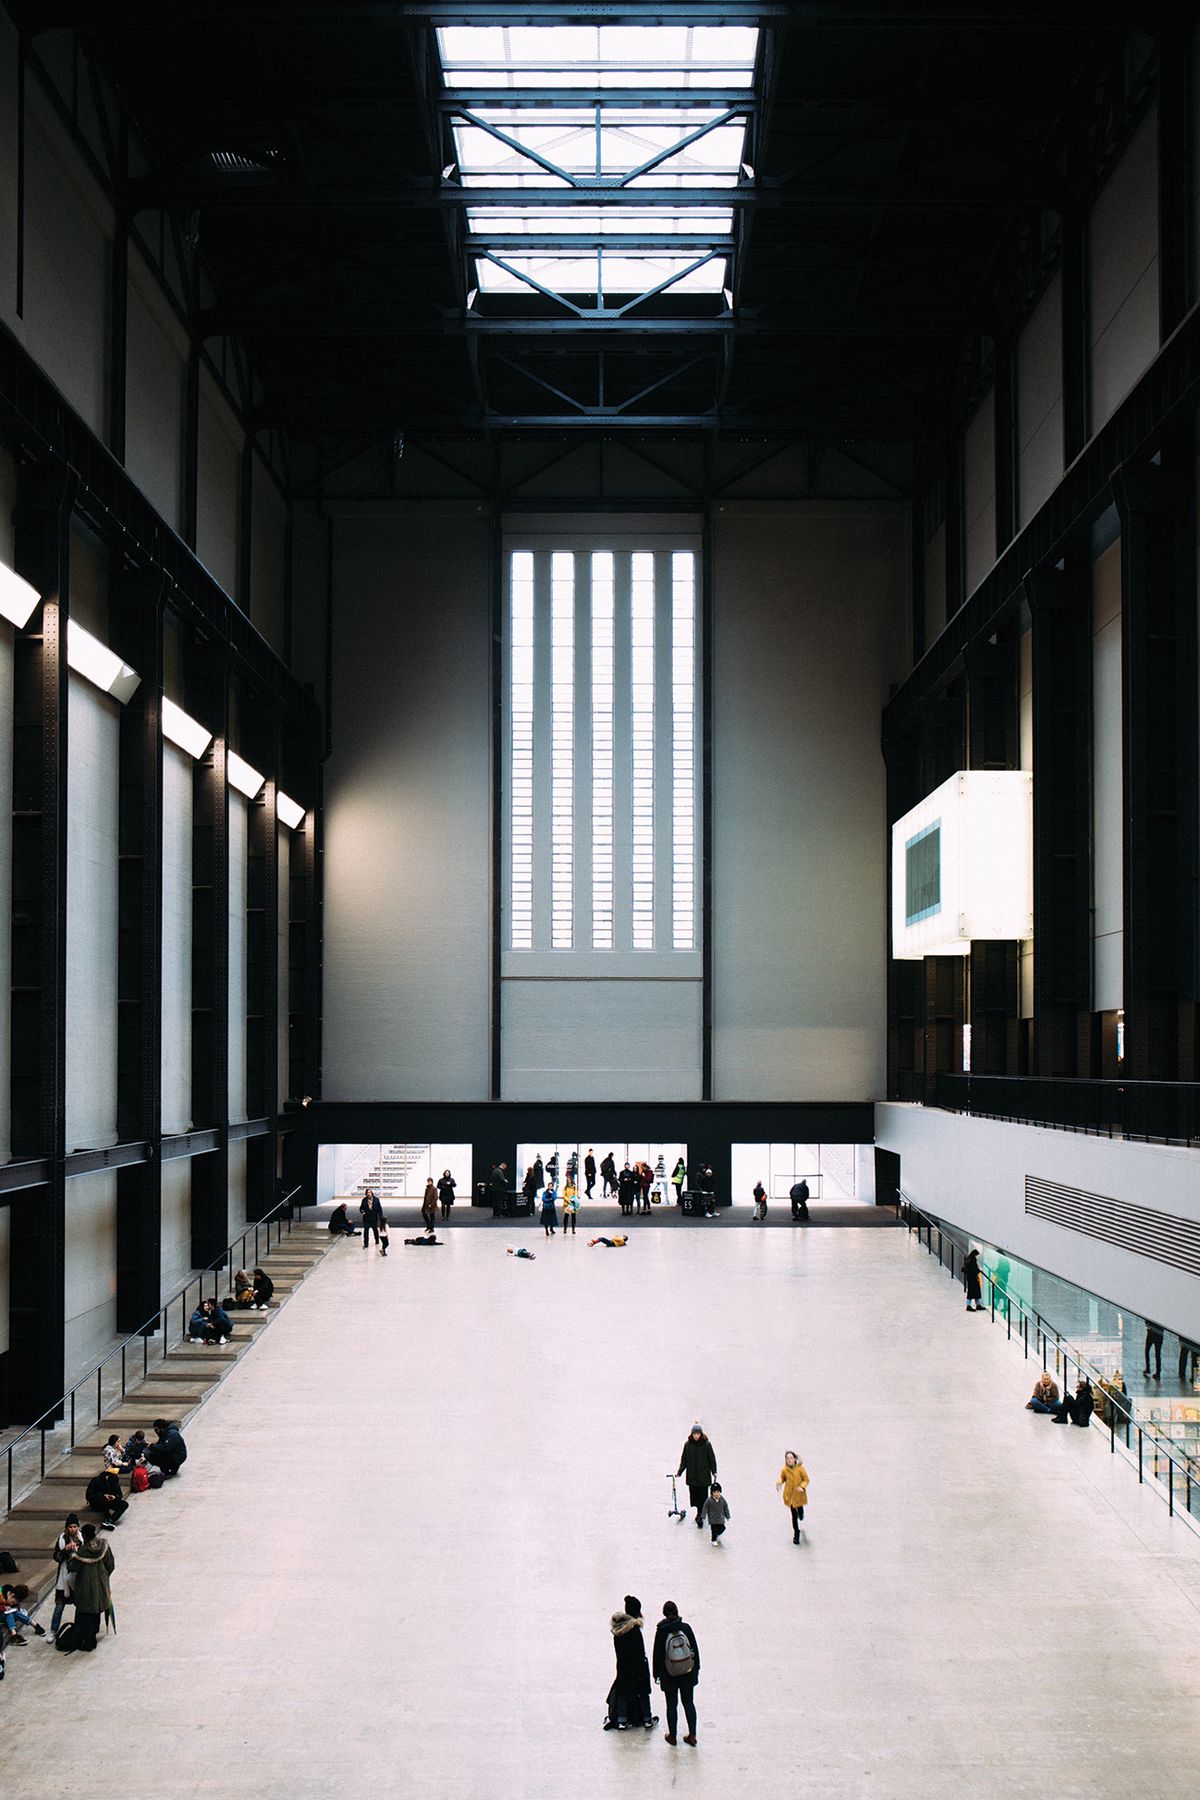 Social distancing measures, a decline in tourism and transport challenges mean that when Tate Modern reopens, visitor numbers could be 70% lower than last year’s Photo by Dil